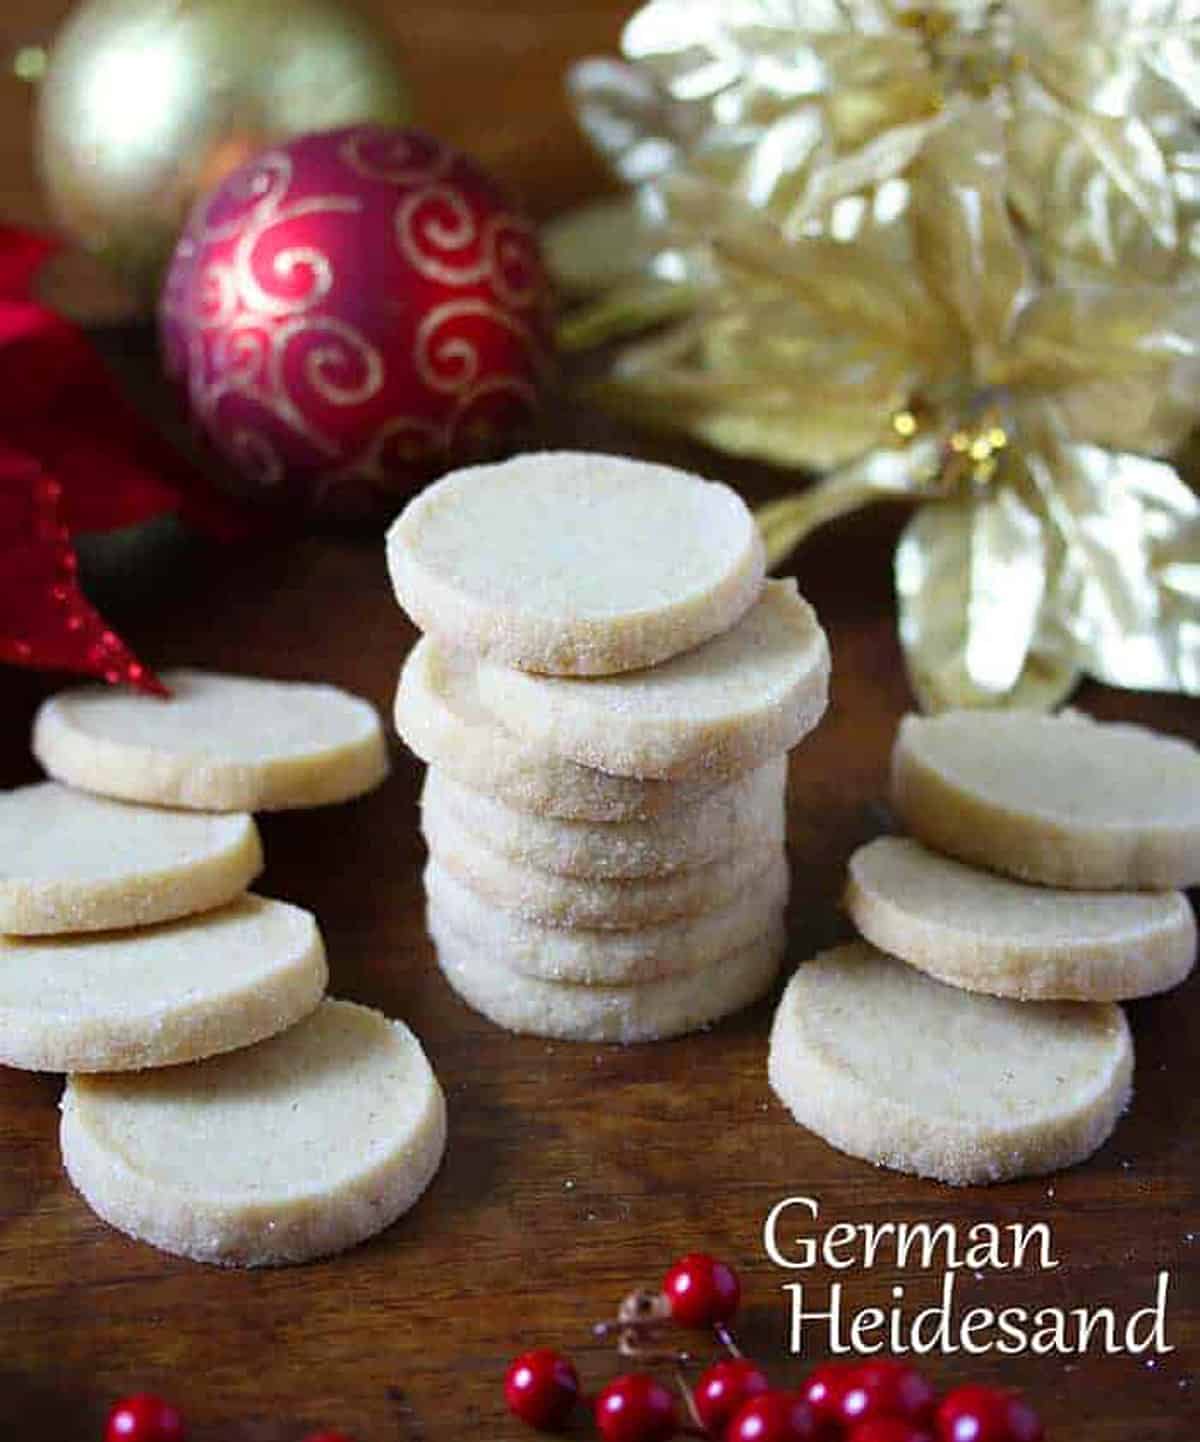 heidesand recipe german shortbread cookies browned butter authentic traditional